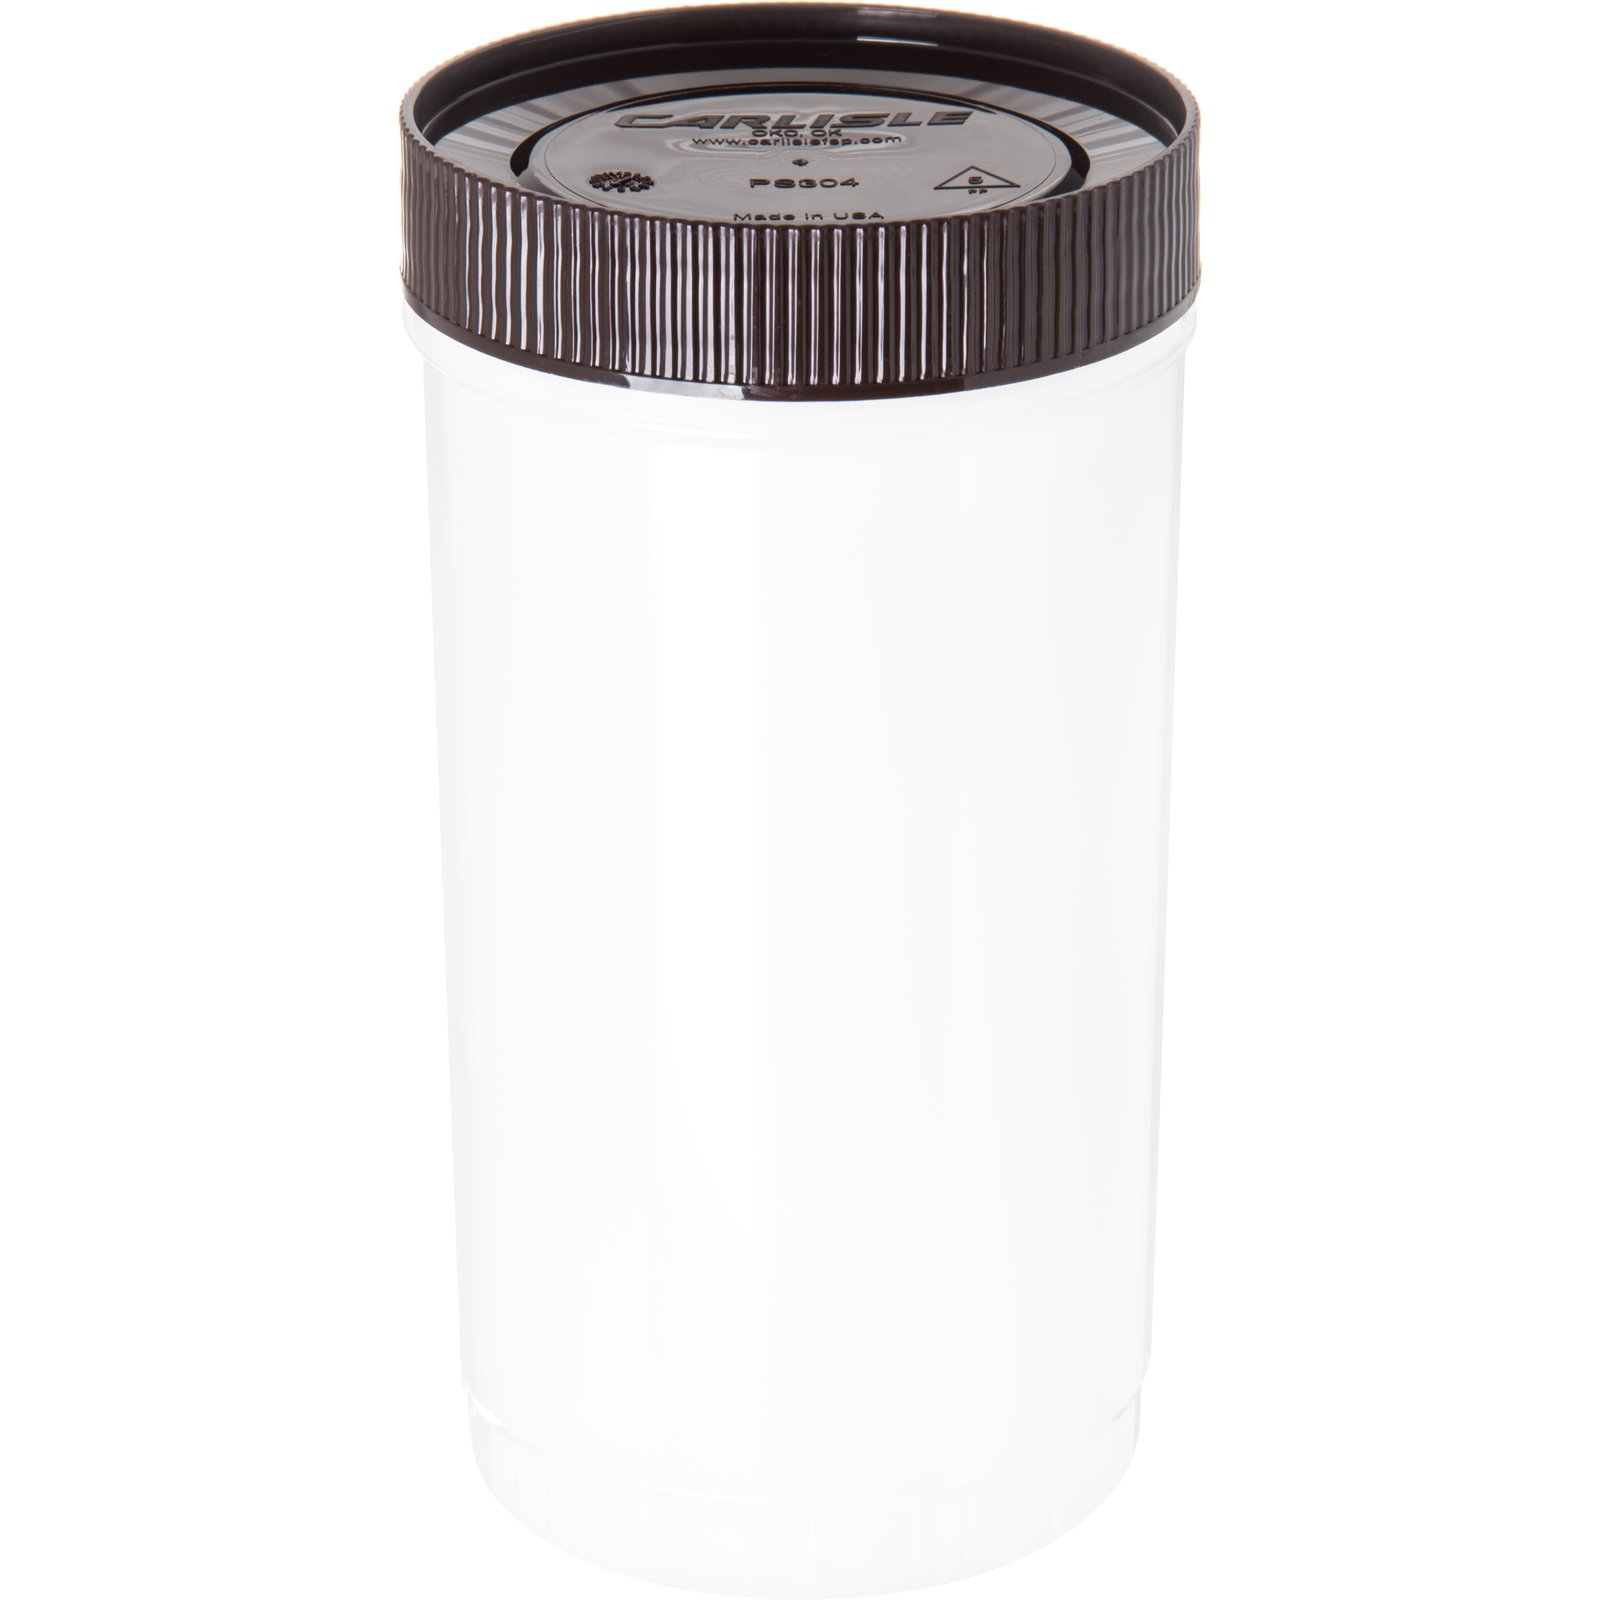 BarConic Juice Backup Container - Quart